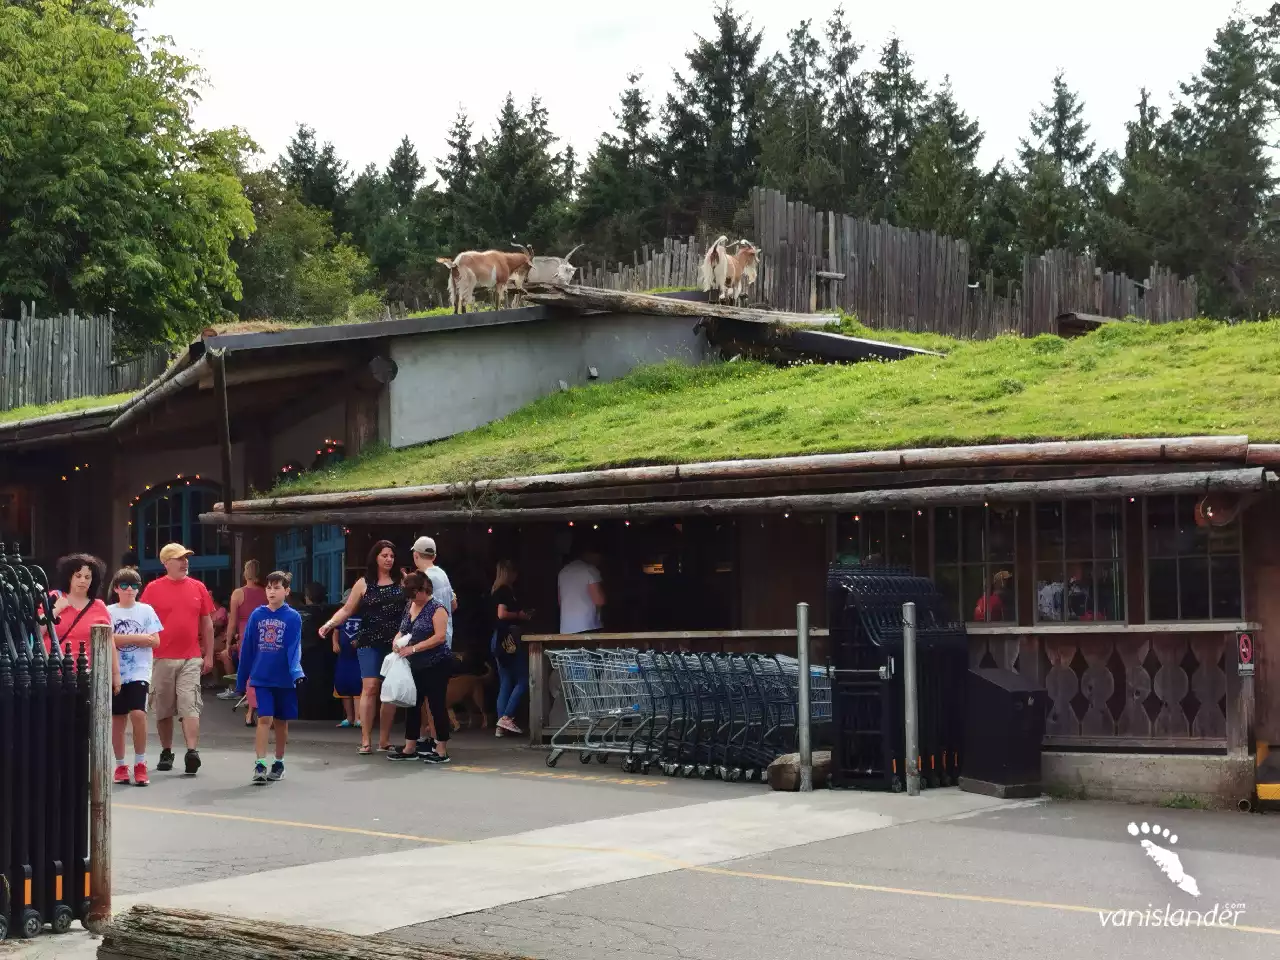 Goats on the roof - Parksville, Vancouver Island